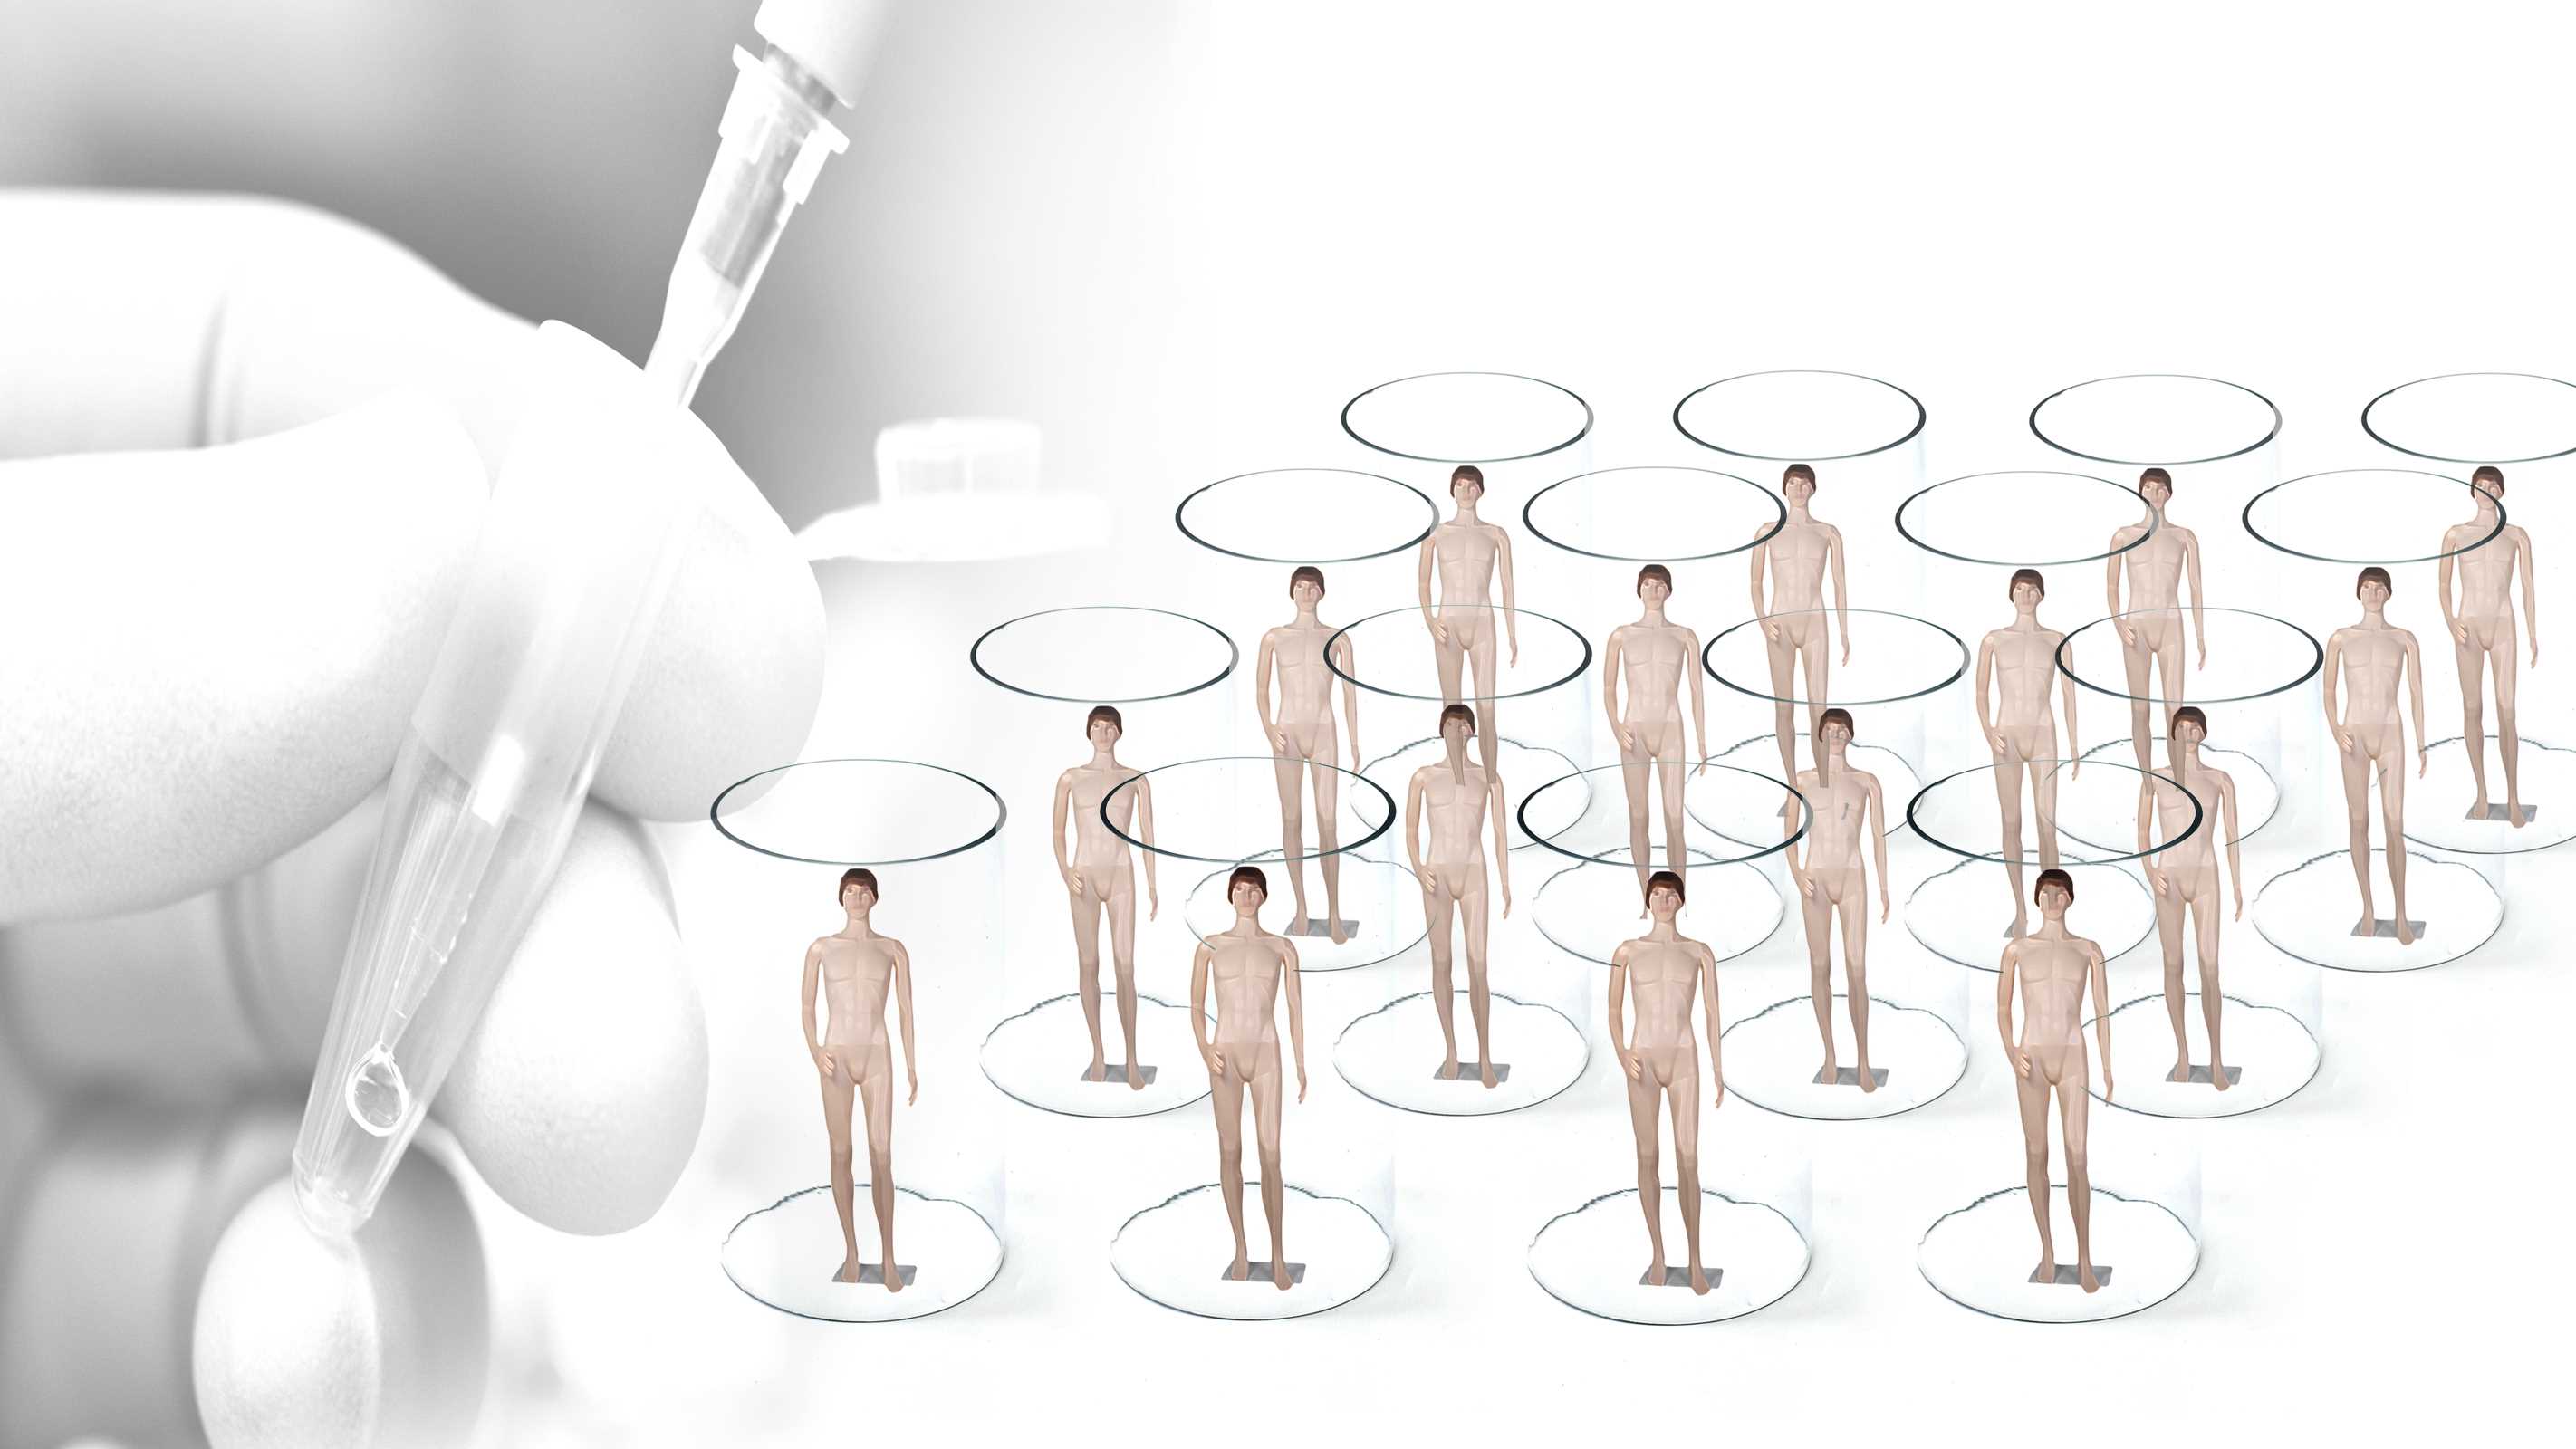 Human cloning pros and cons: should it be legal? - netivist